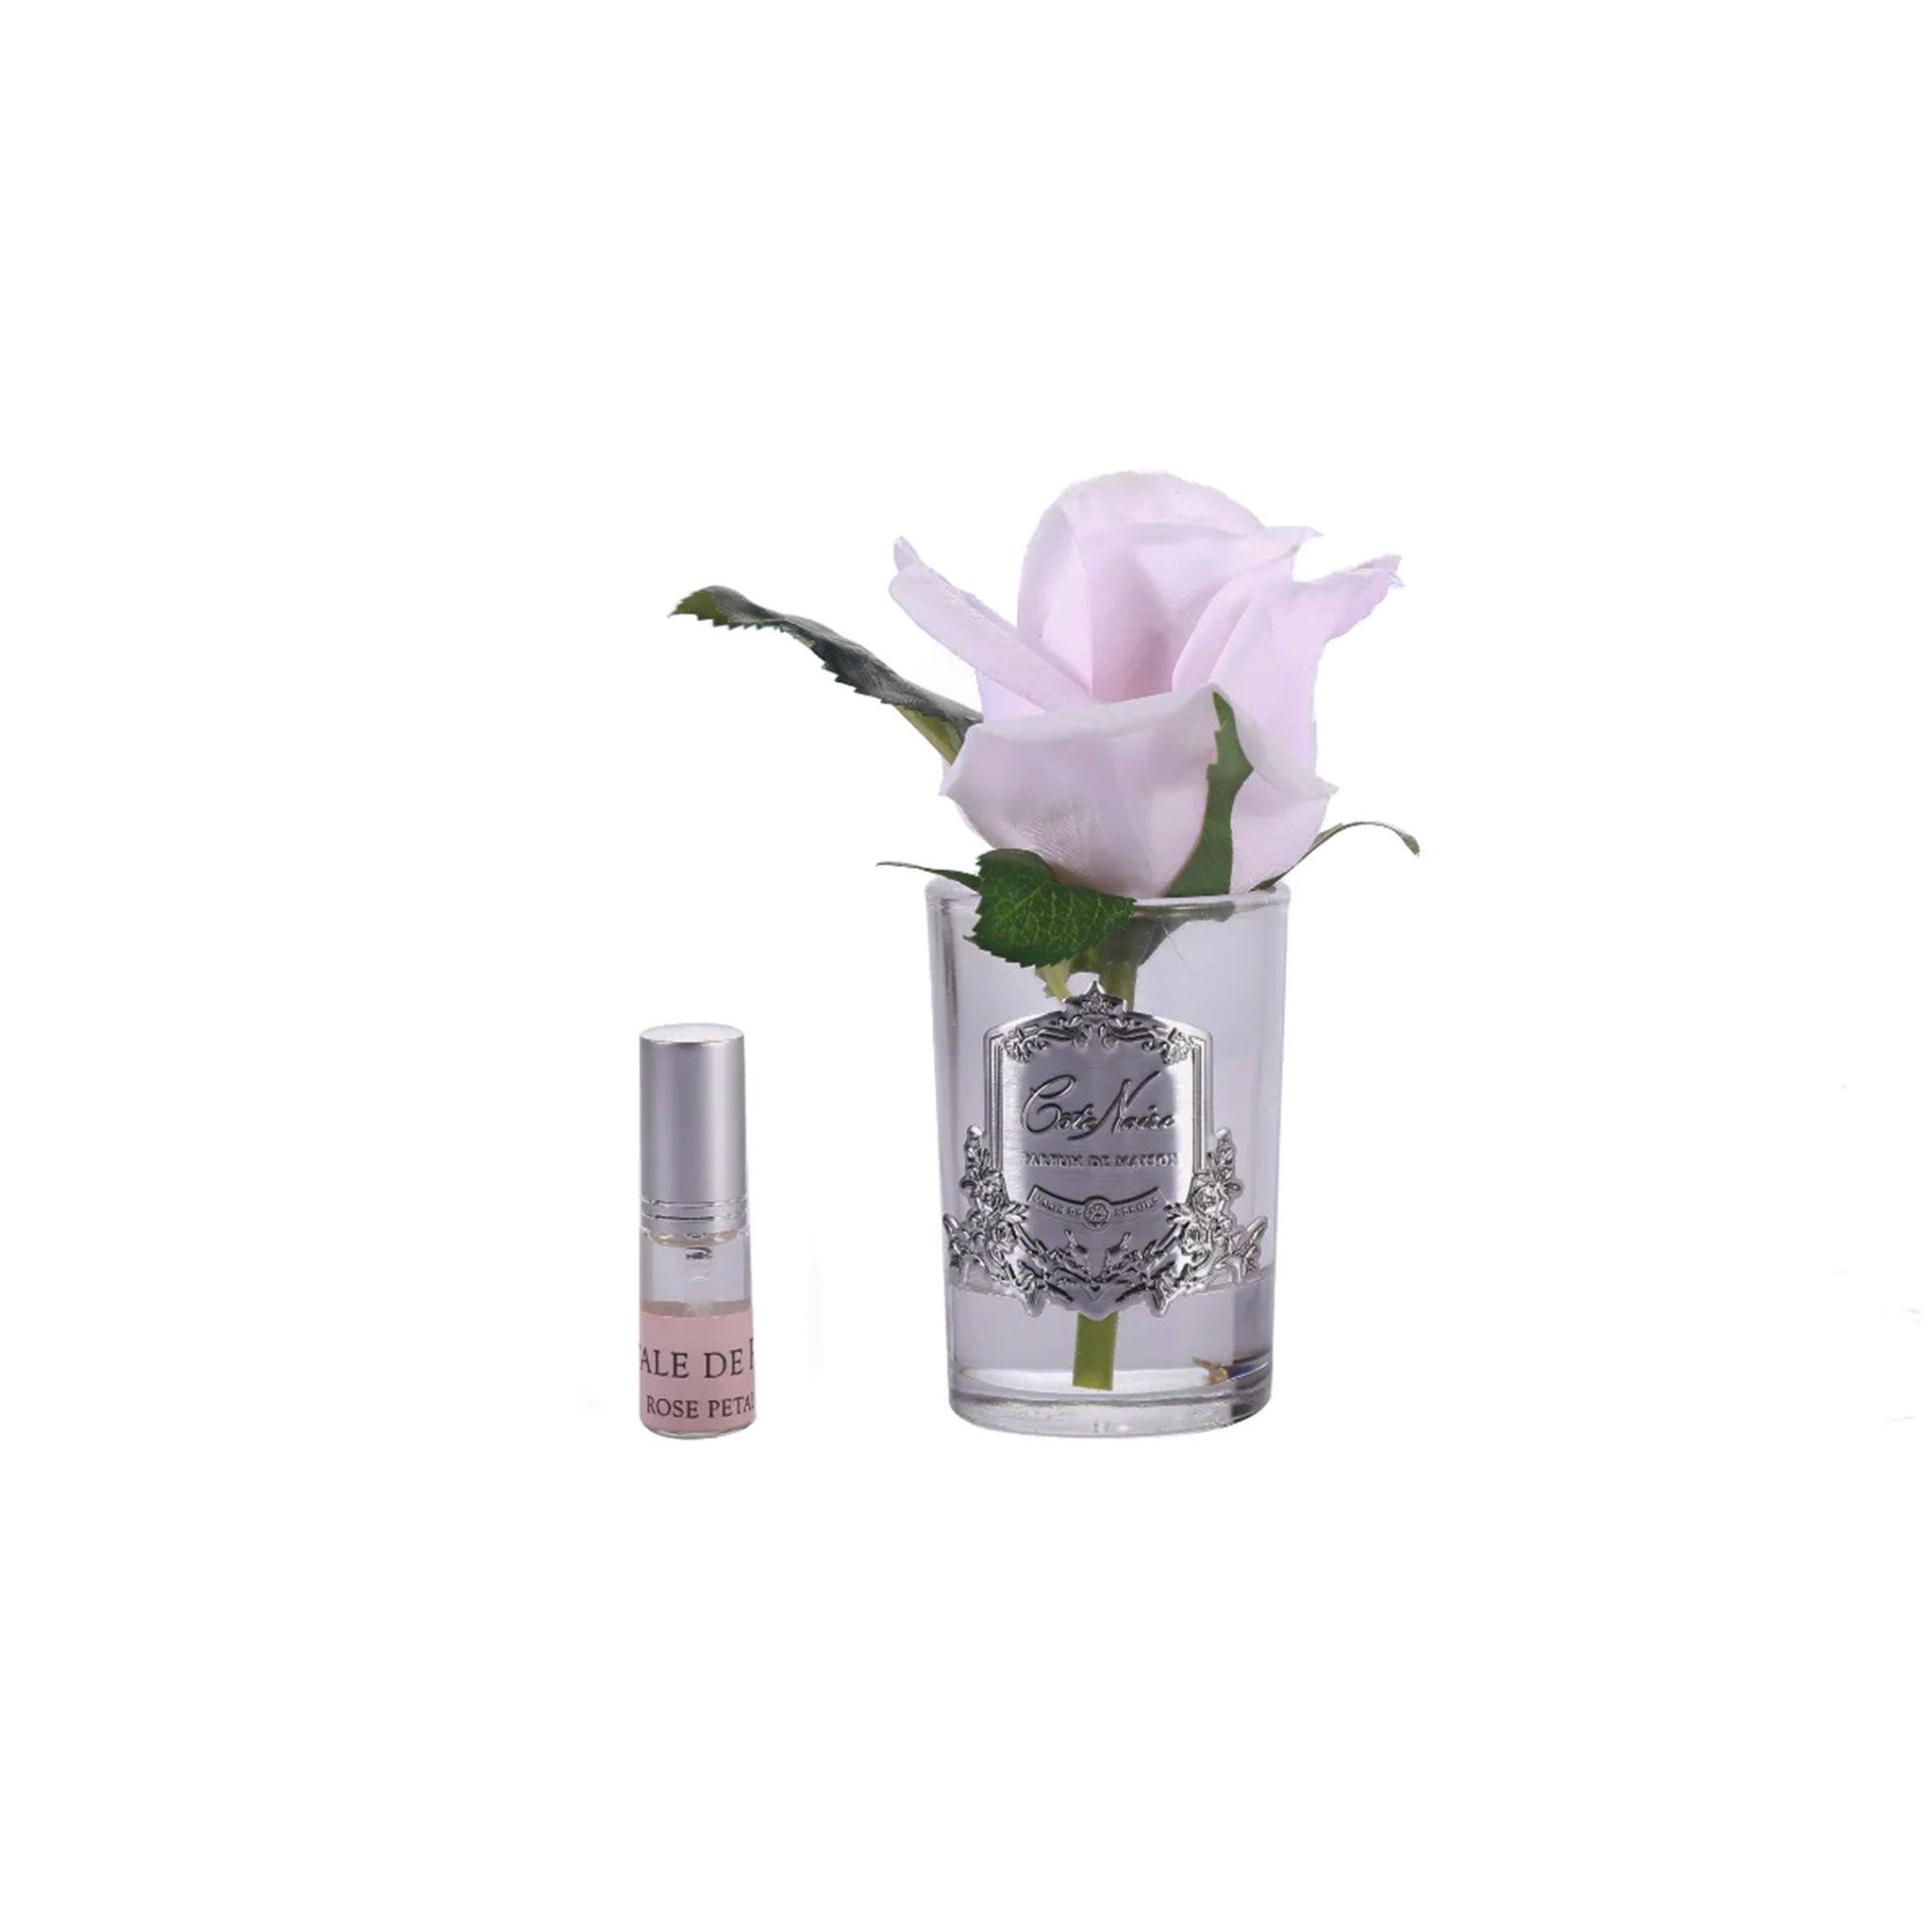 a french pink rose by cote noire in a glass vase with a fragrance bottle on a white background